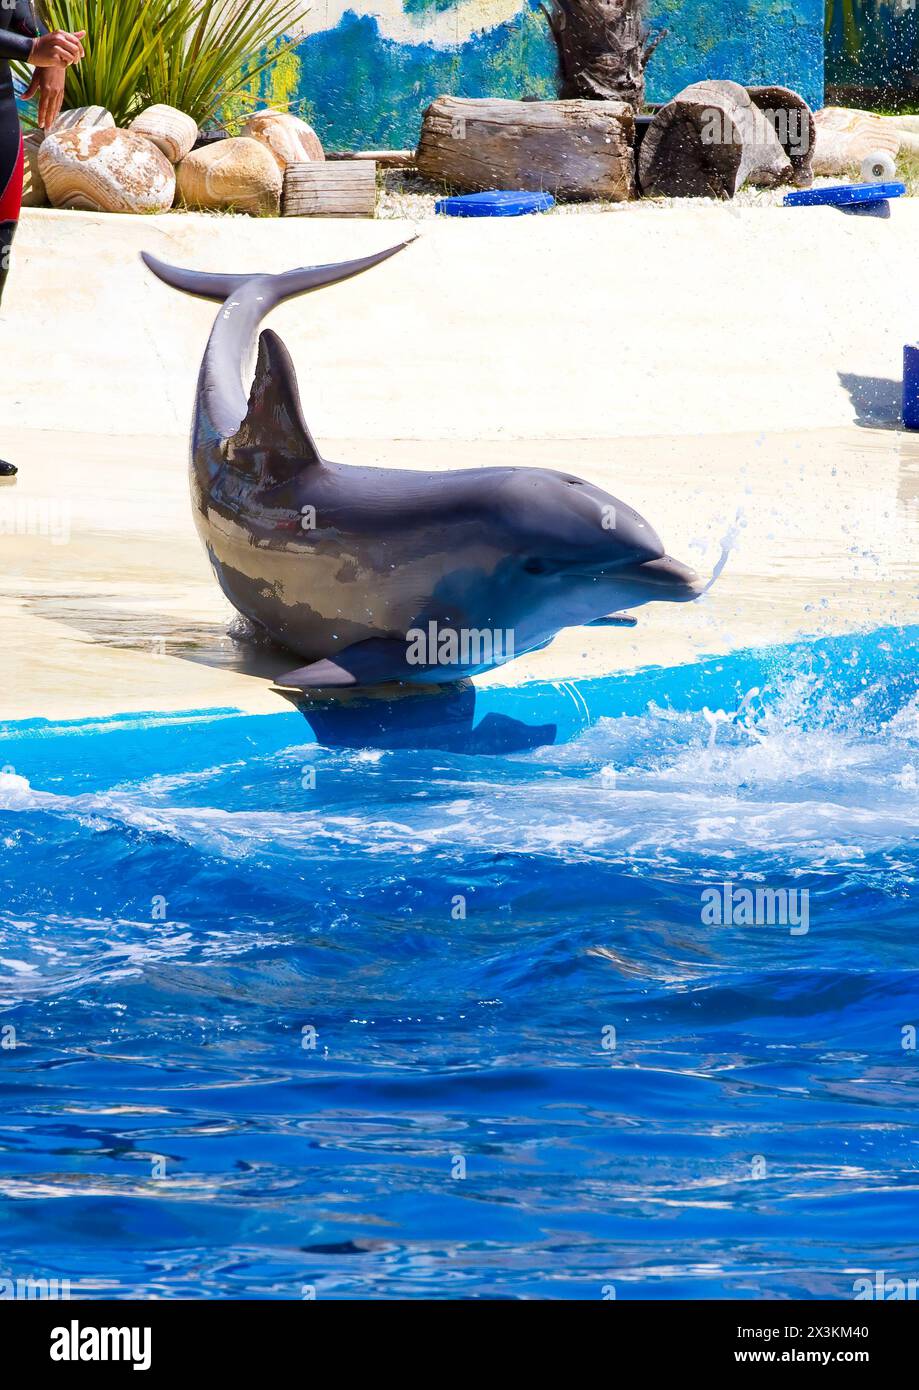 Captivating Images: Majestic Dolphin Leaping out of the Ocean in Stunning Sea Shot Stock Photo